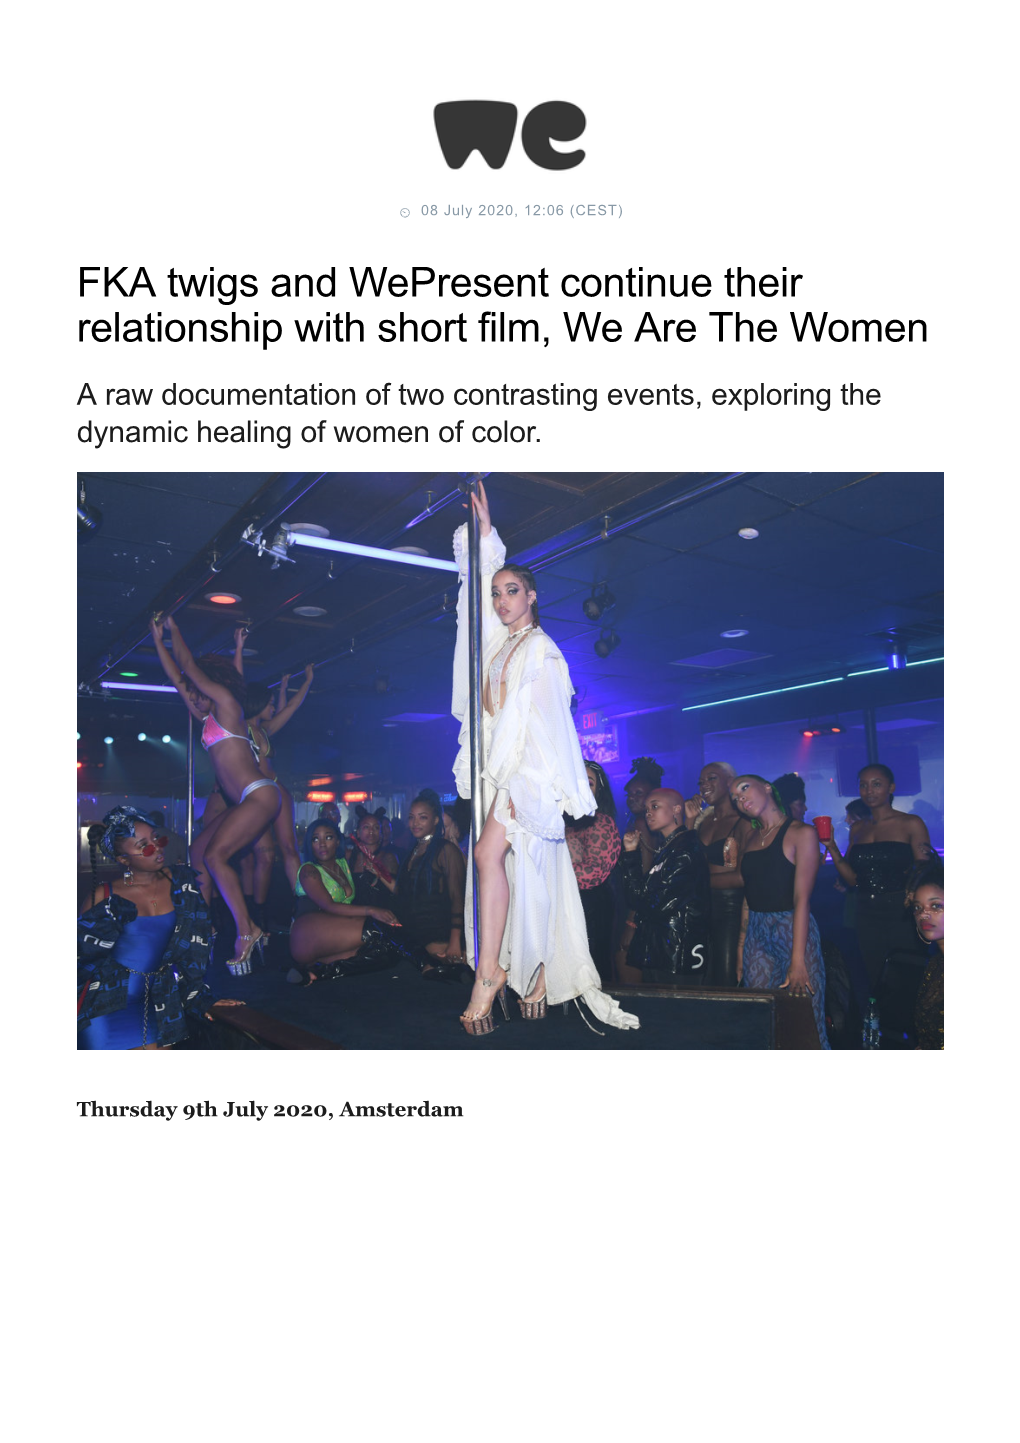 FKA Twigs and Wepresent Continue Their Relationship with Short Film, We Are the Women